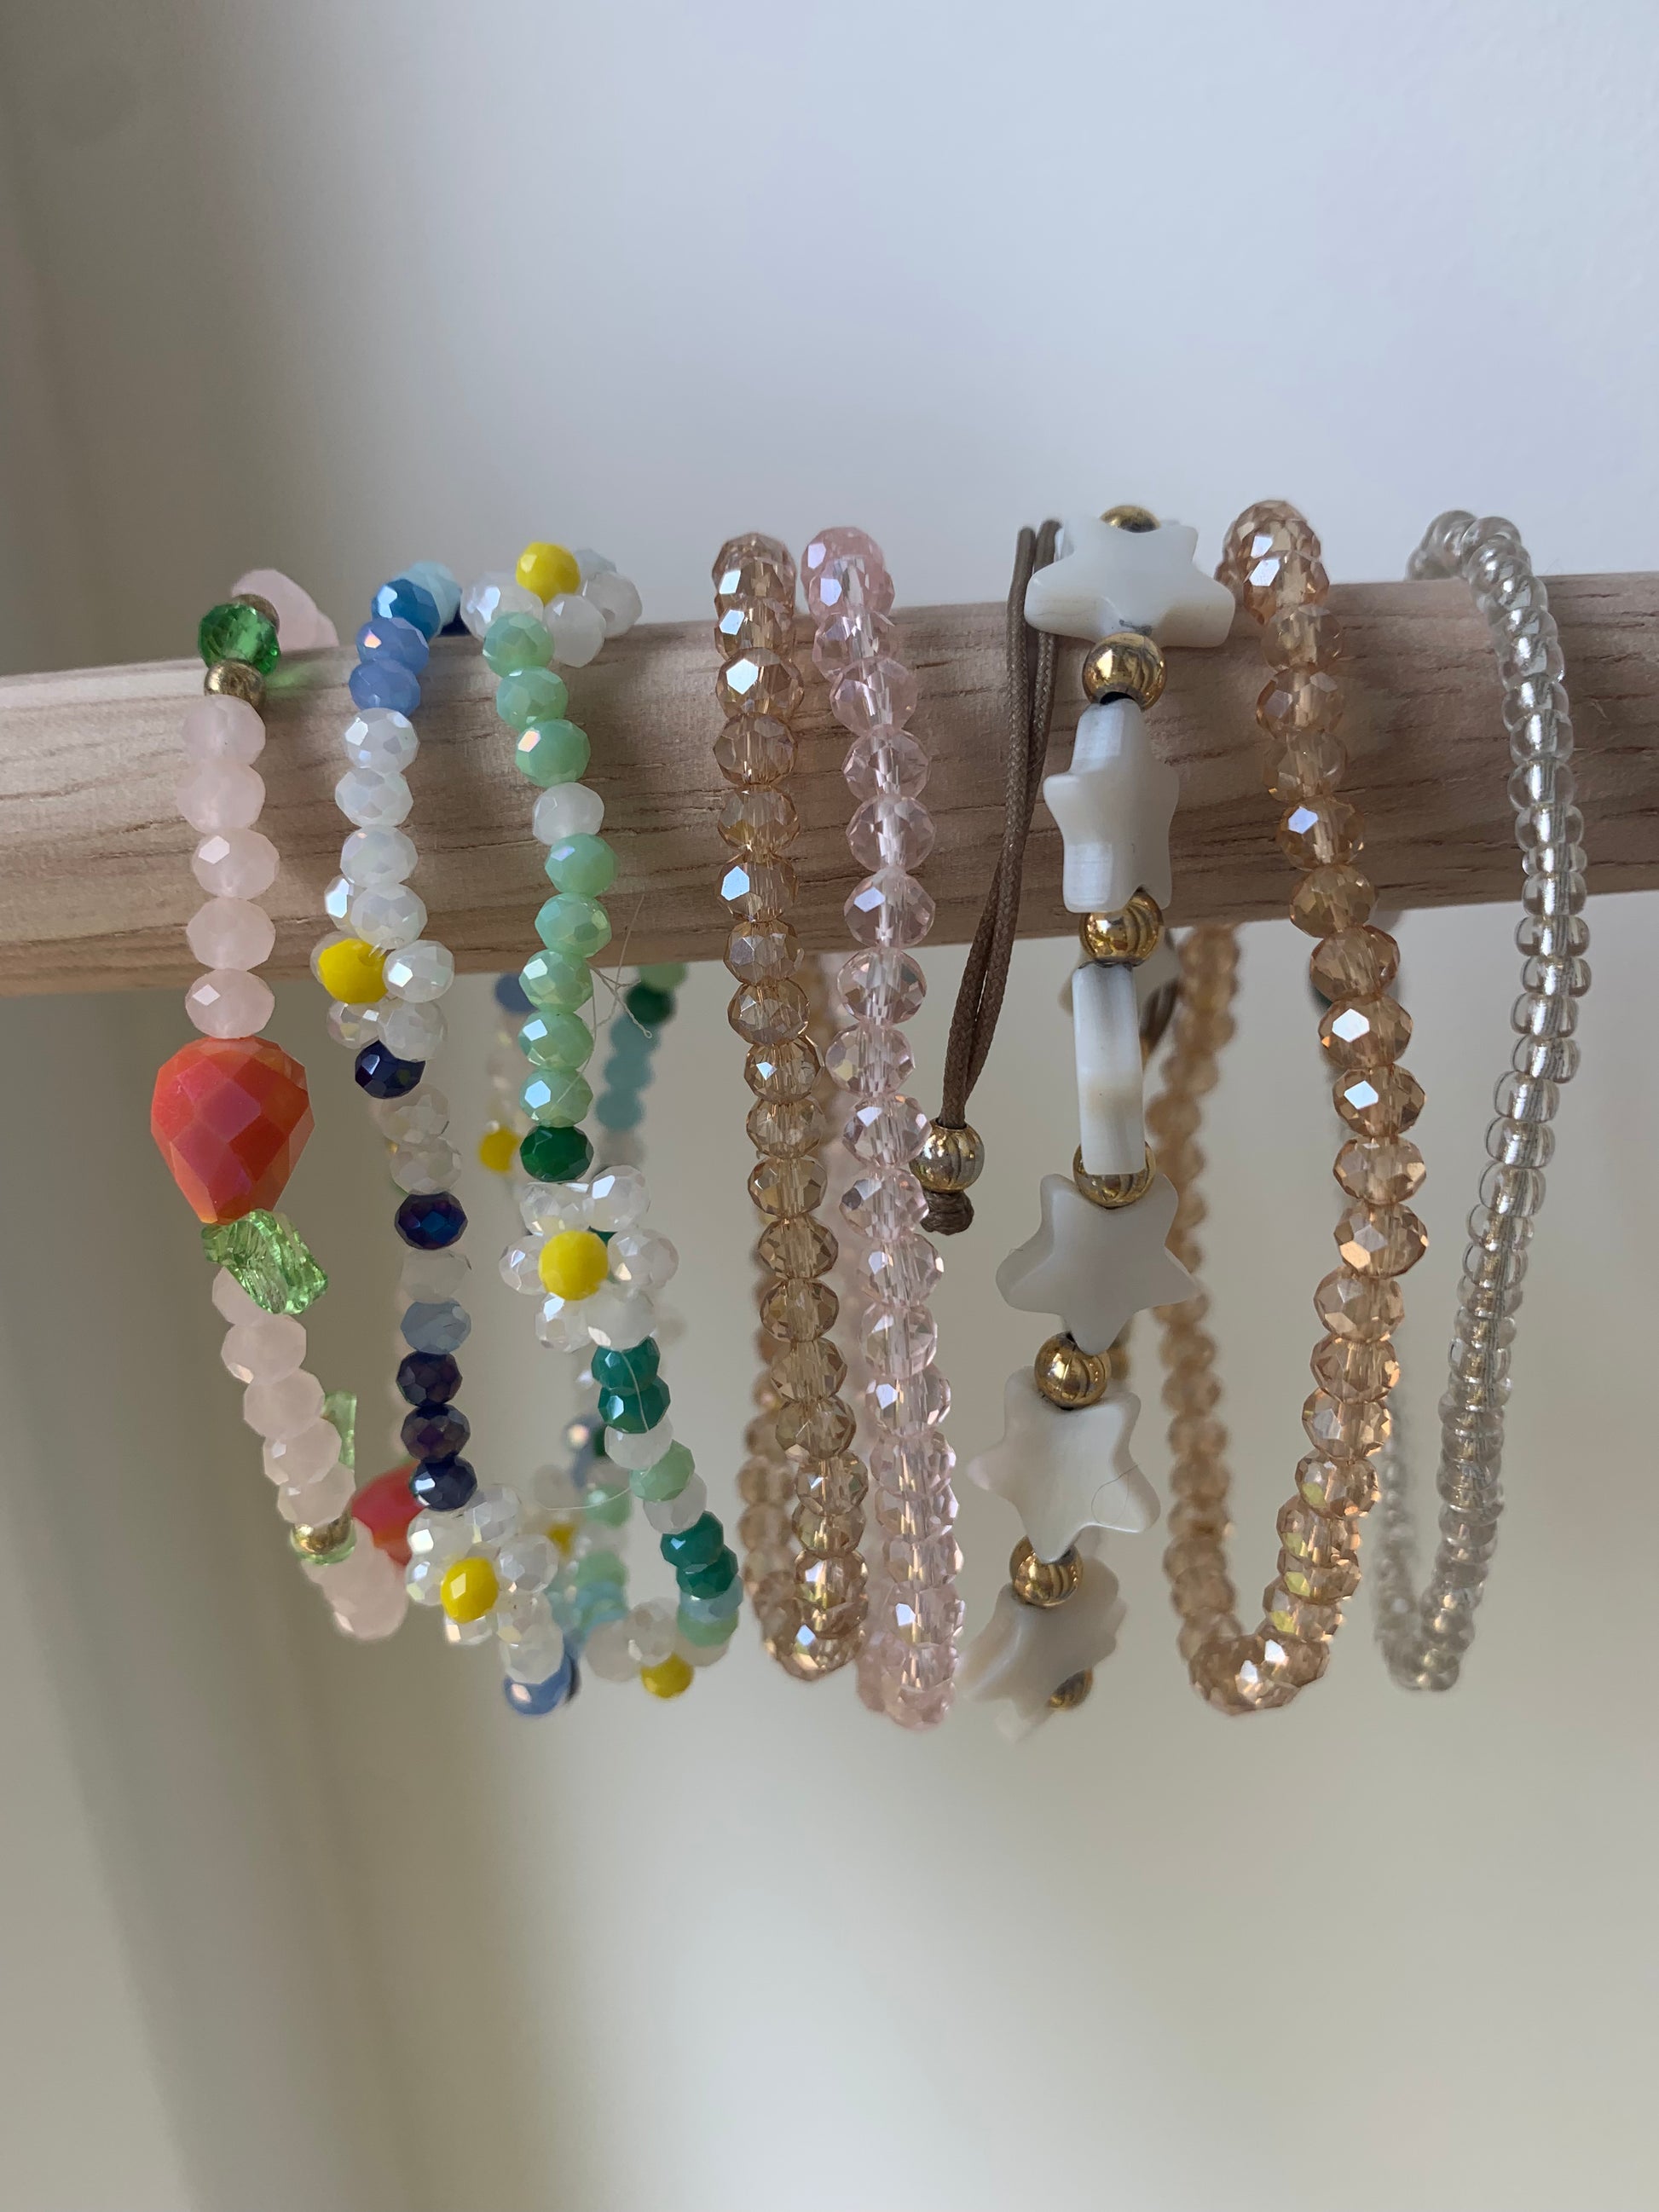 &nbsp;Sparkle Bracelet £3.50  Gorgeous Elasticated Sparkle Bracelet available in Rose, Champagne, Blue Flower, Green Flower, Apricot Flower, Peach Fruit and Leaf Bead  Perfect for layering